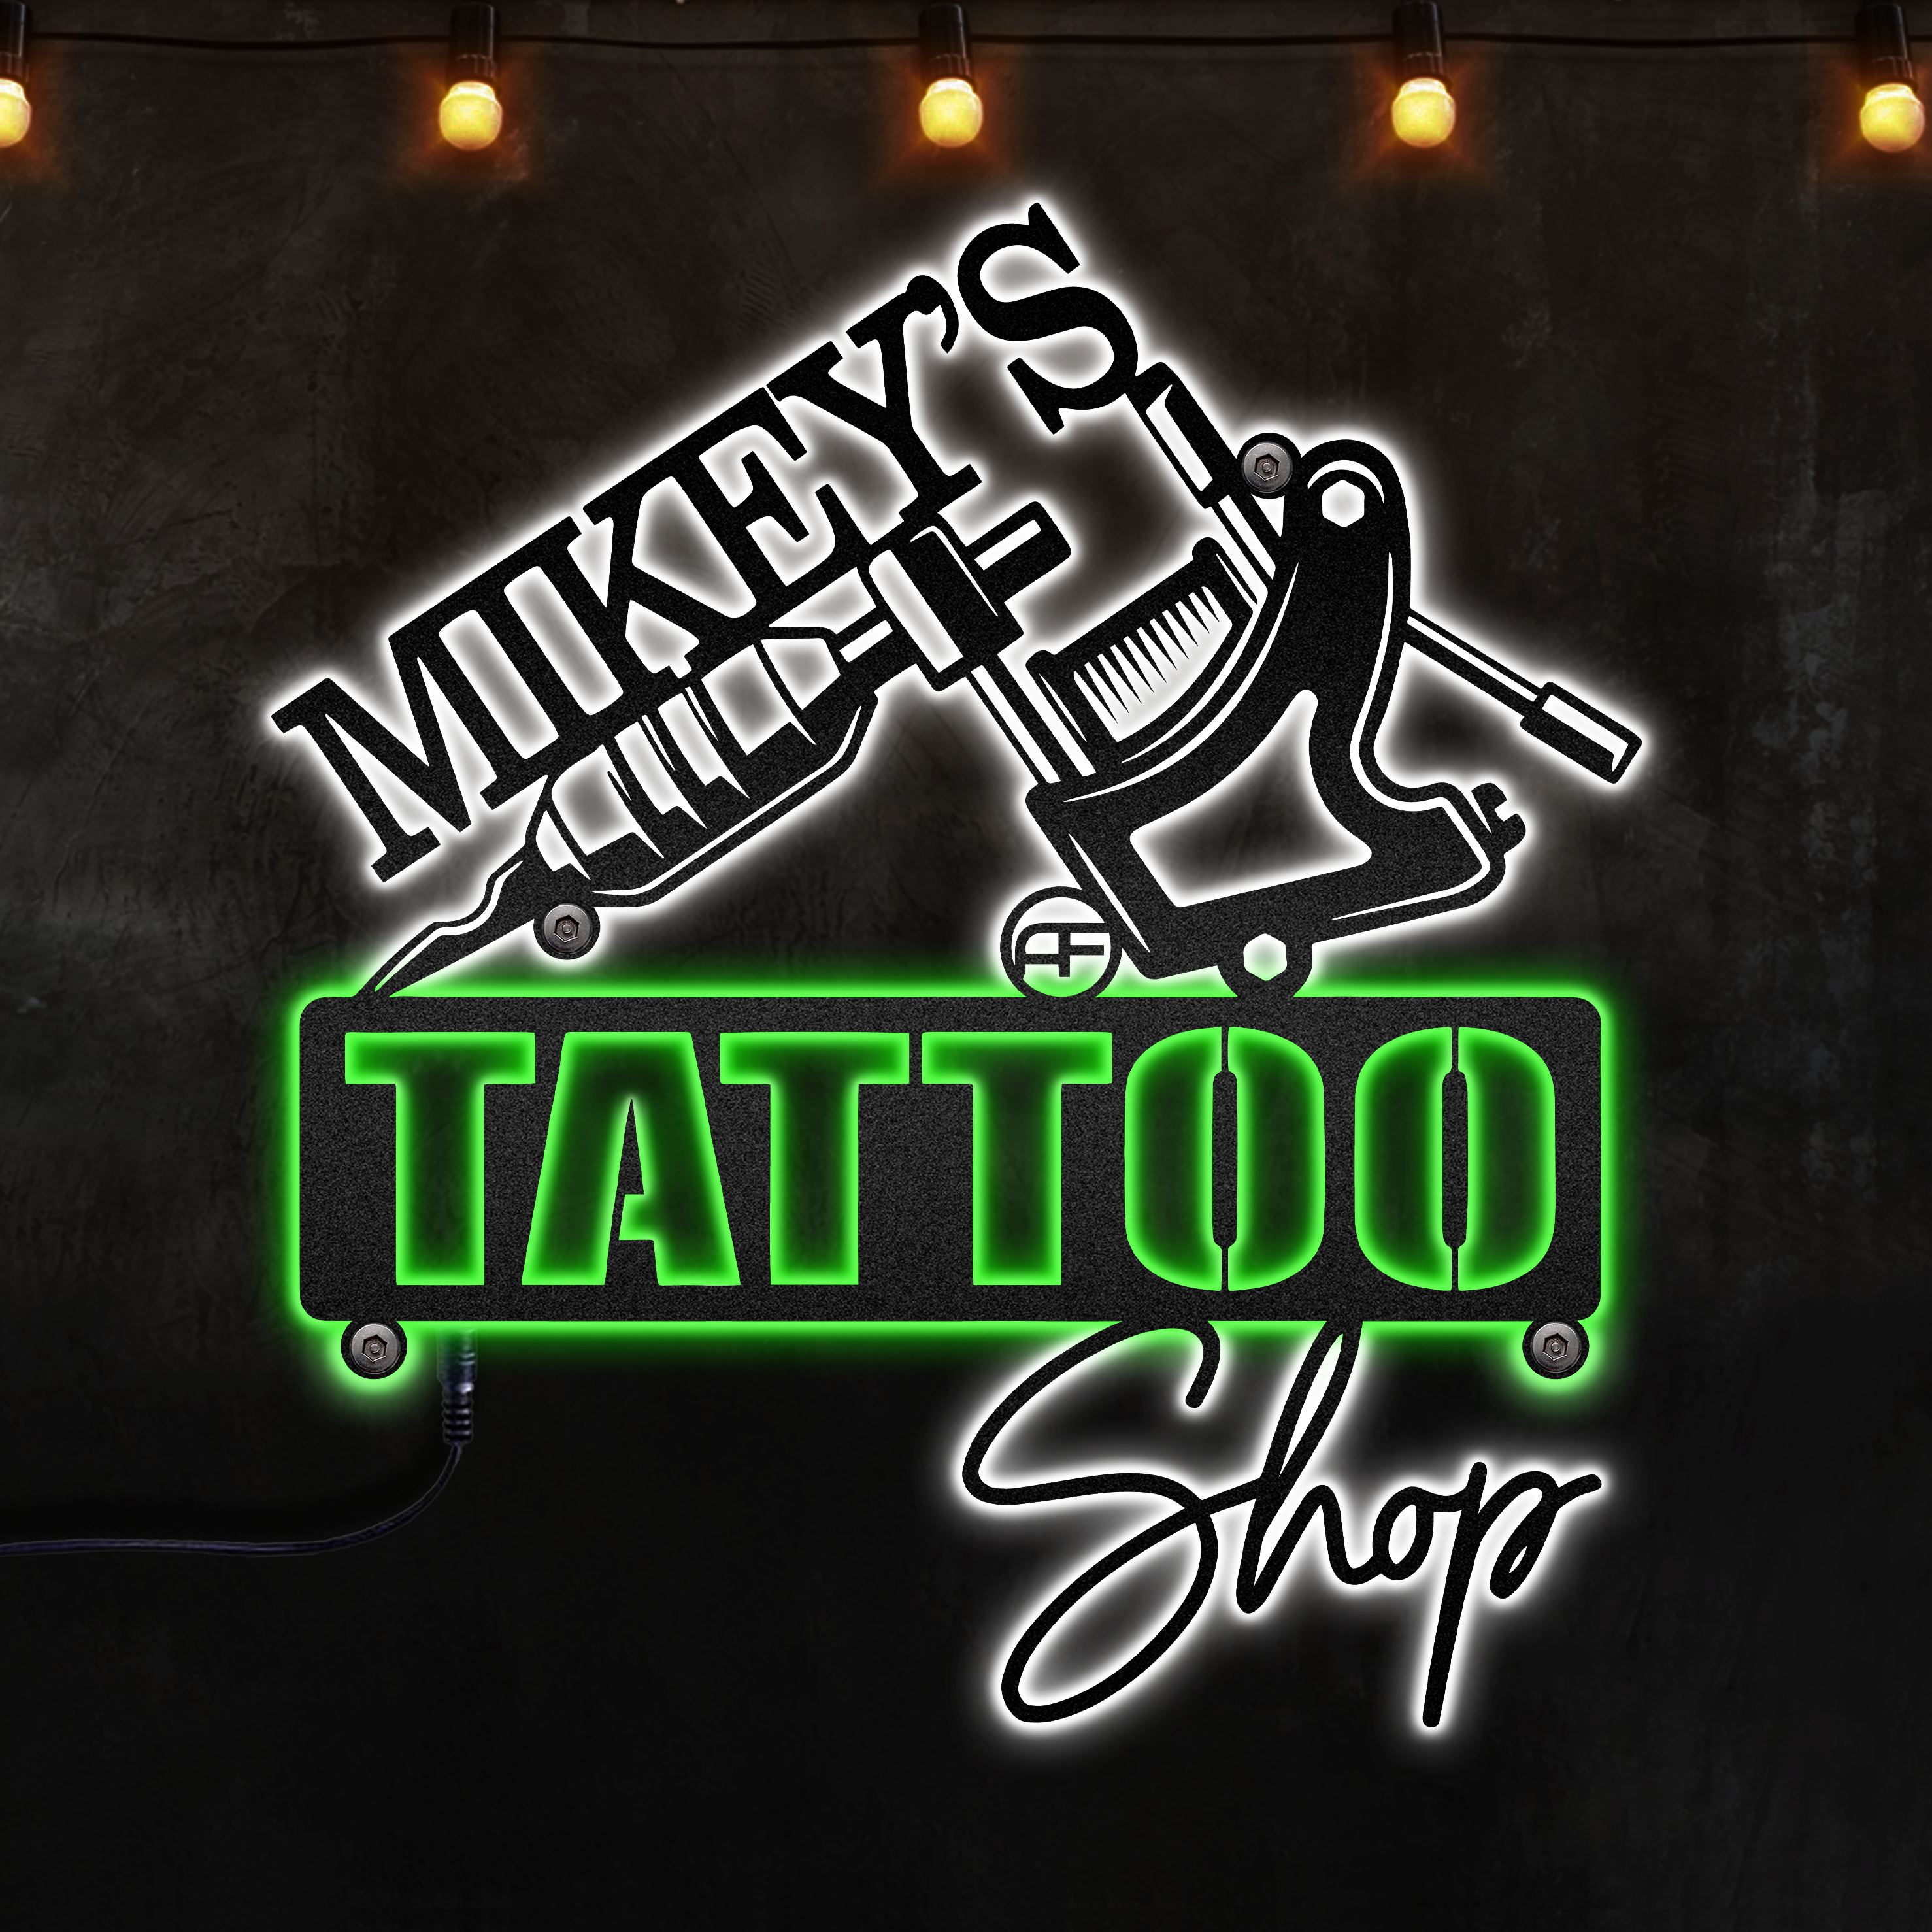 LED Neon Sign Tattoo Studio – The Neon Company | PowerLEDs Neon Signs